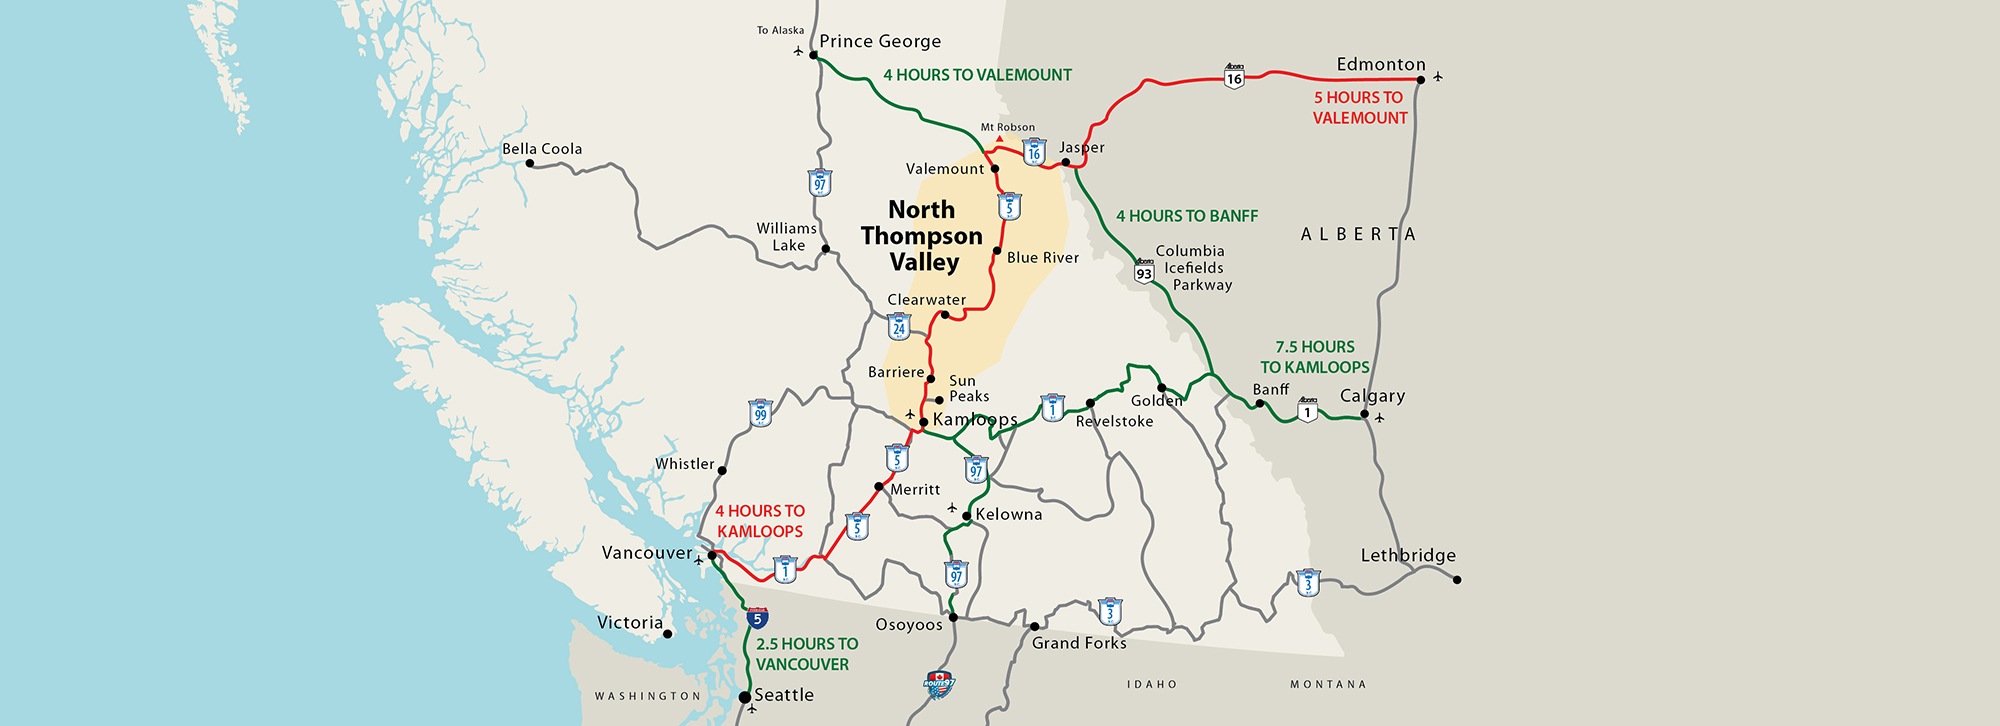 Getting to the North Thompson Valley - Map